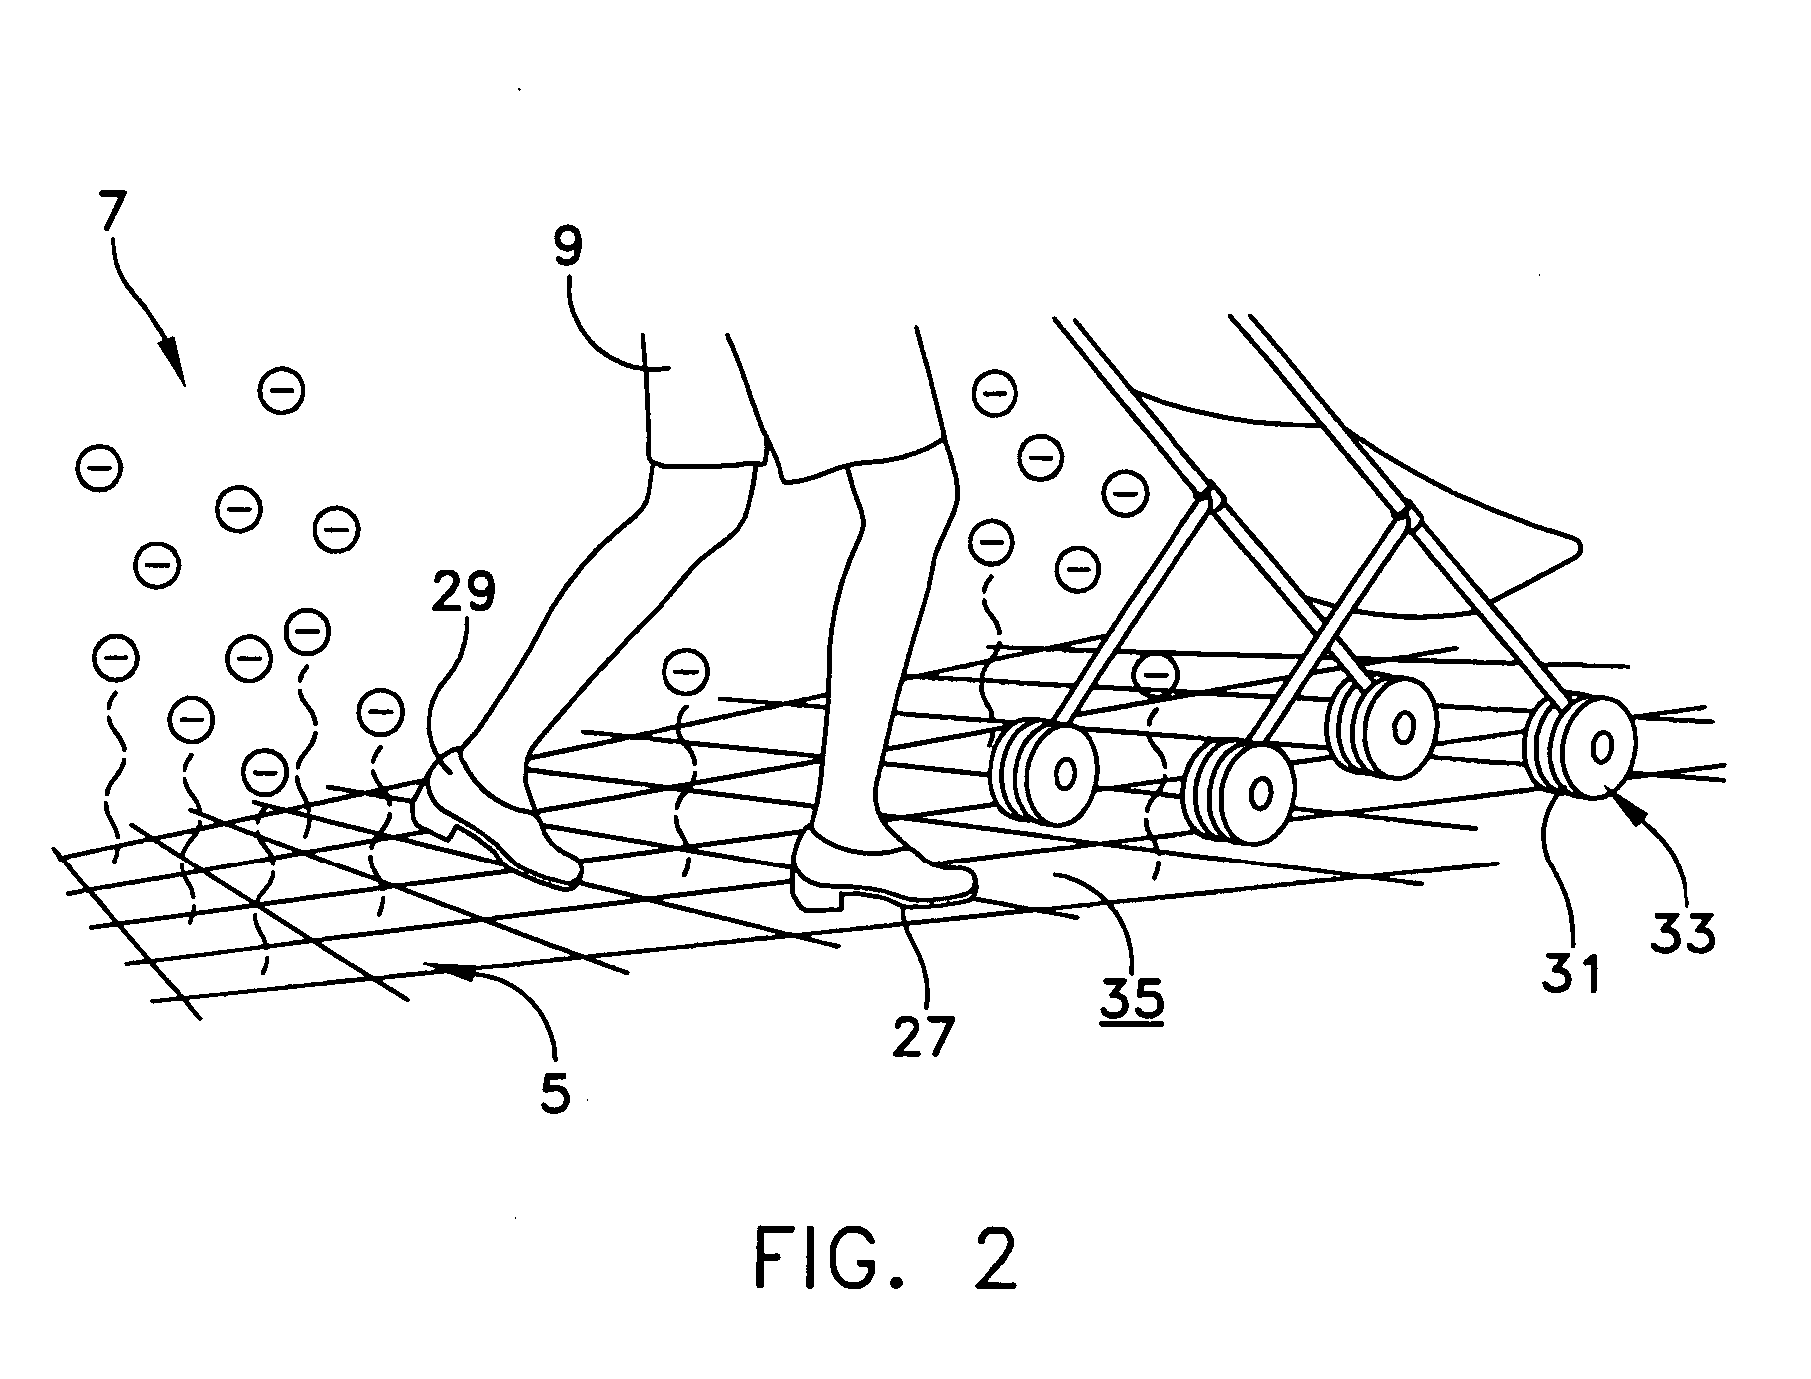 Ion-generating floor covering and method for forming same